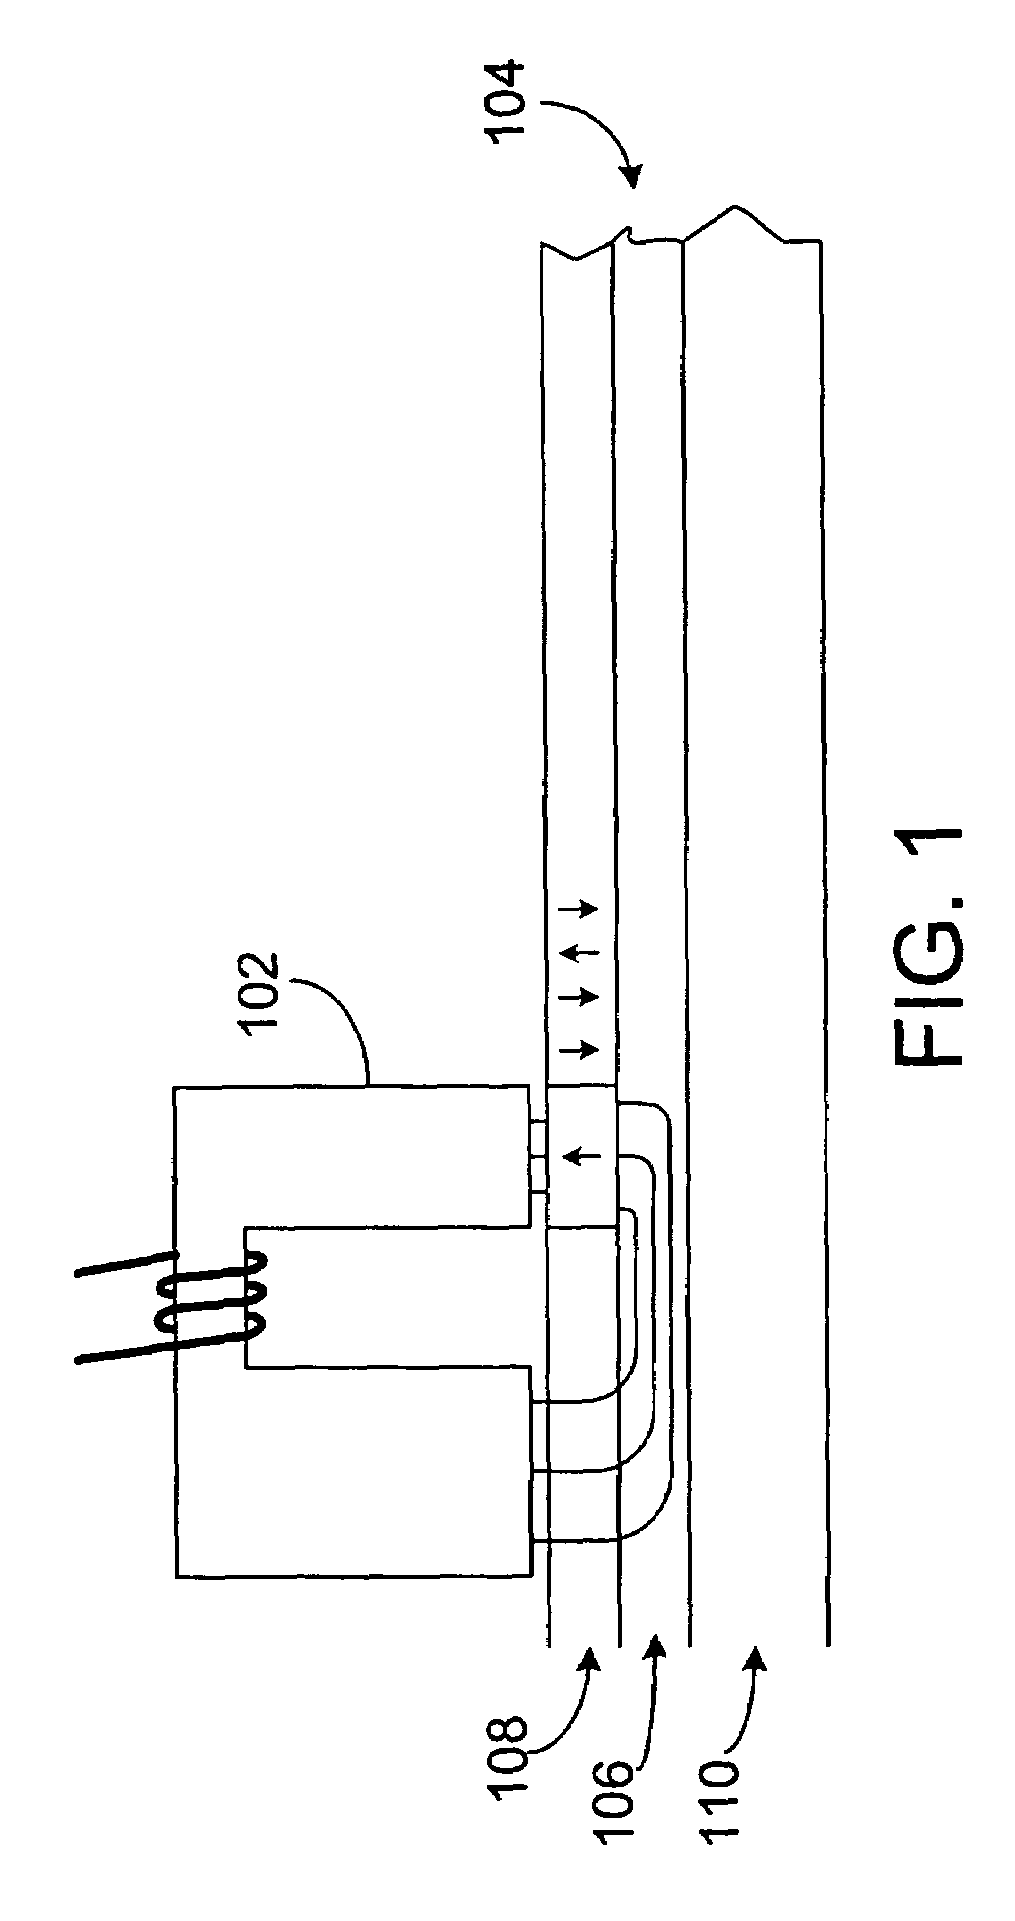 Method and apparatus to limit DC-level in coded data